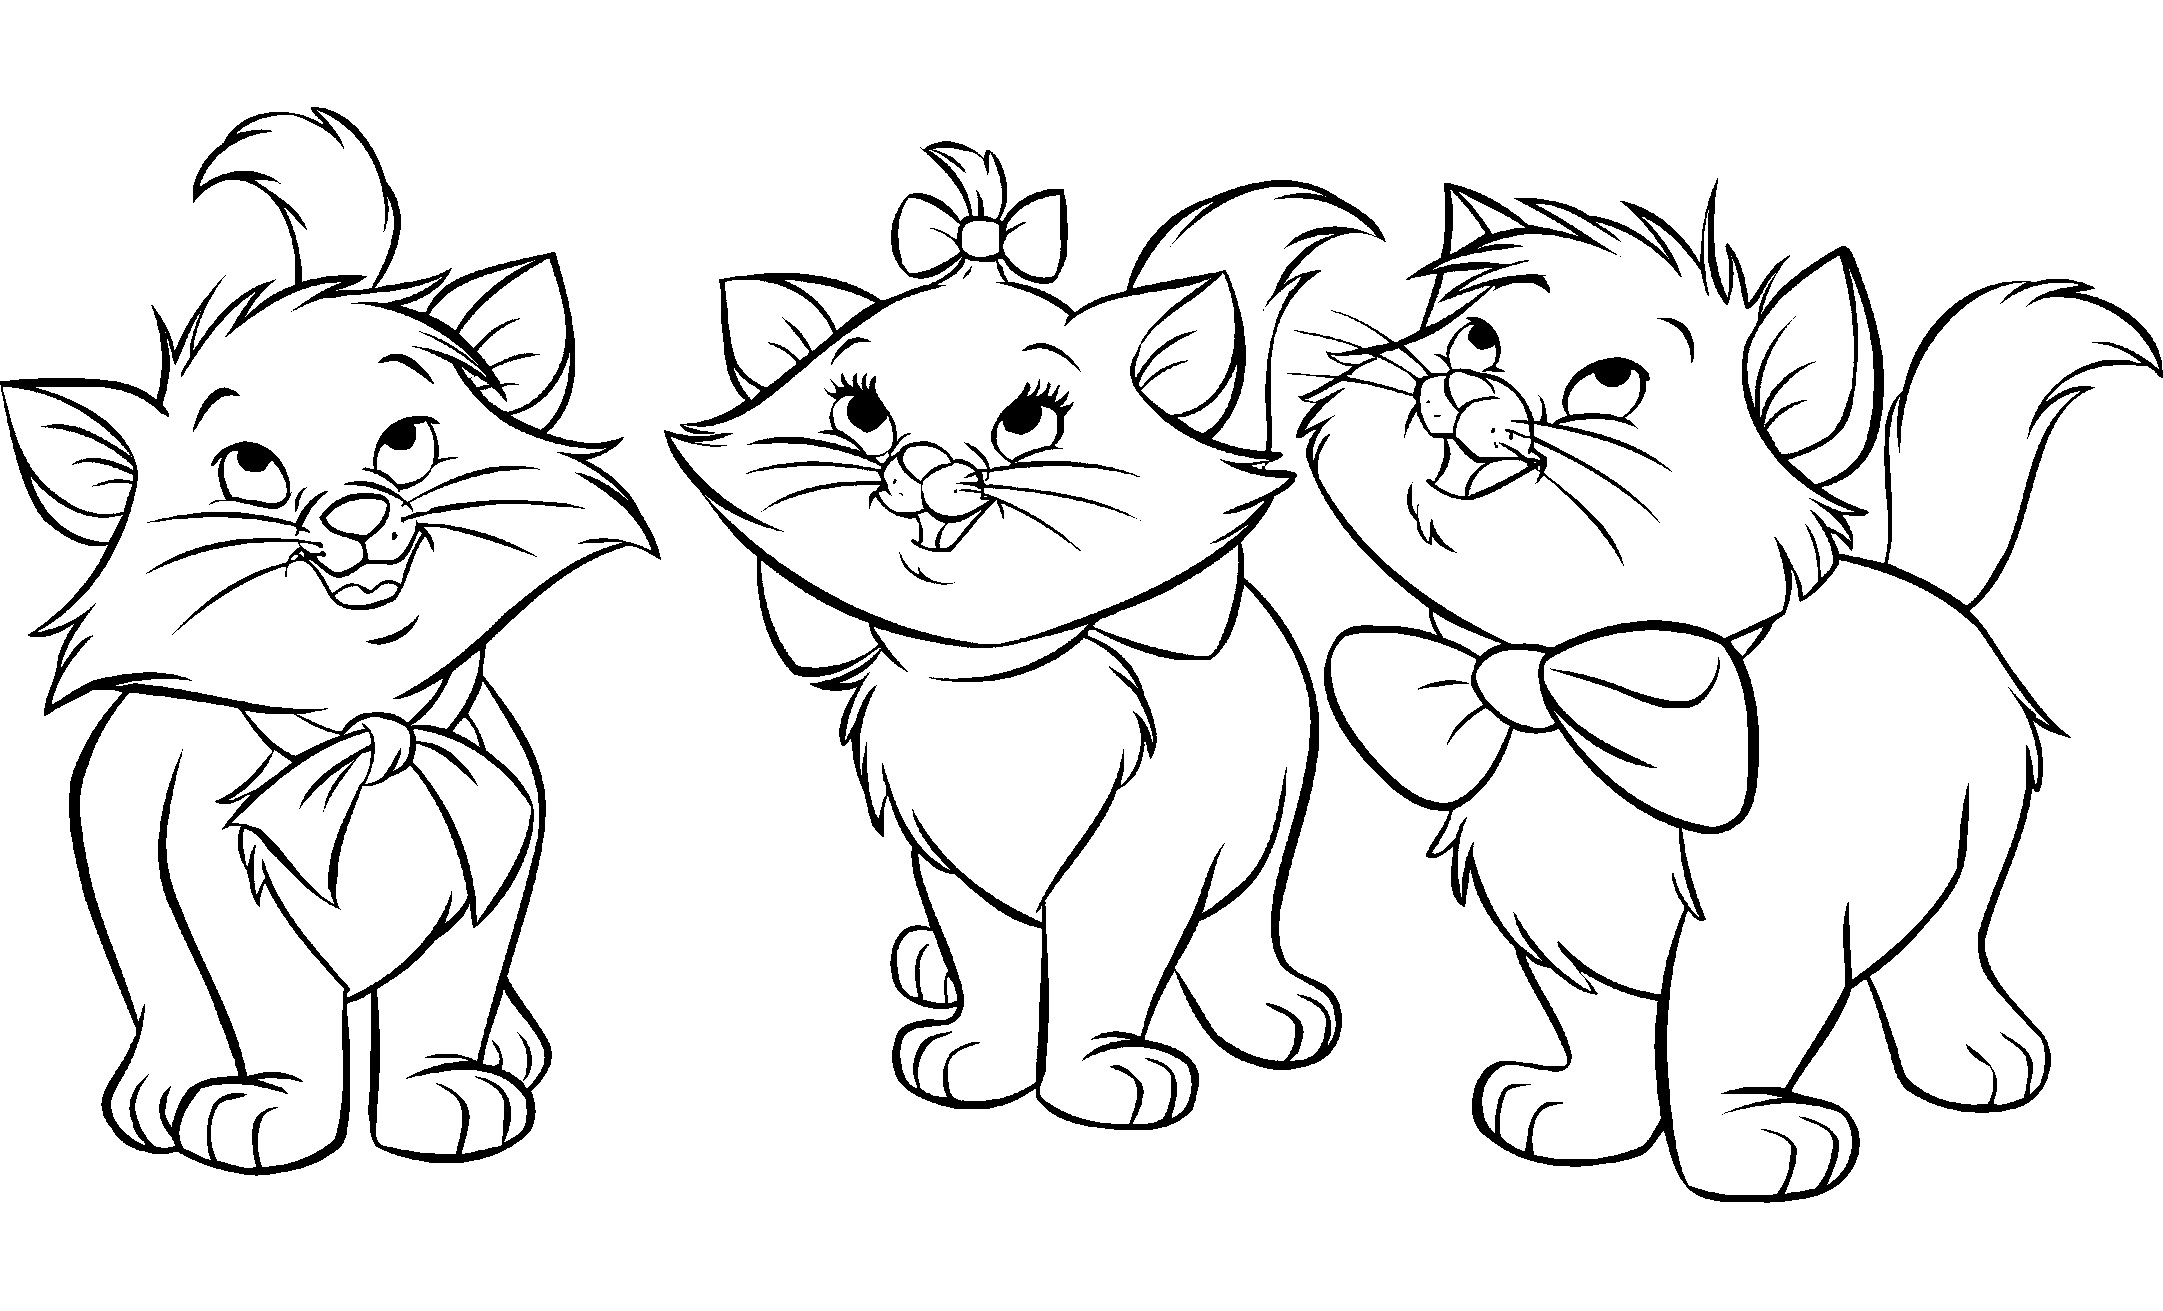 Aristocats (Animation Movies) Free Printable Coloring Pages